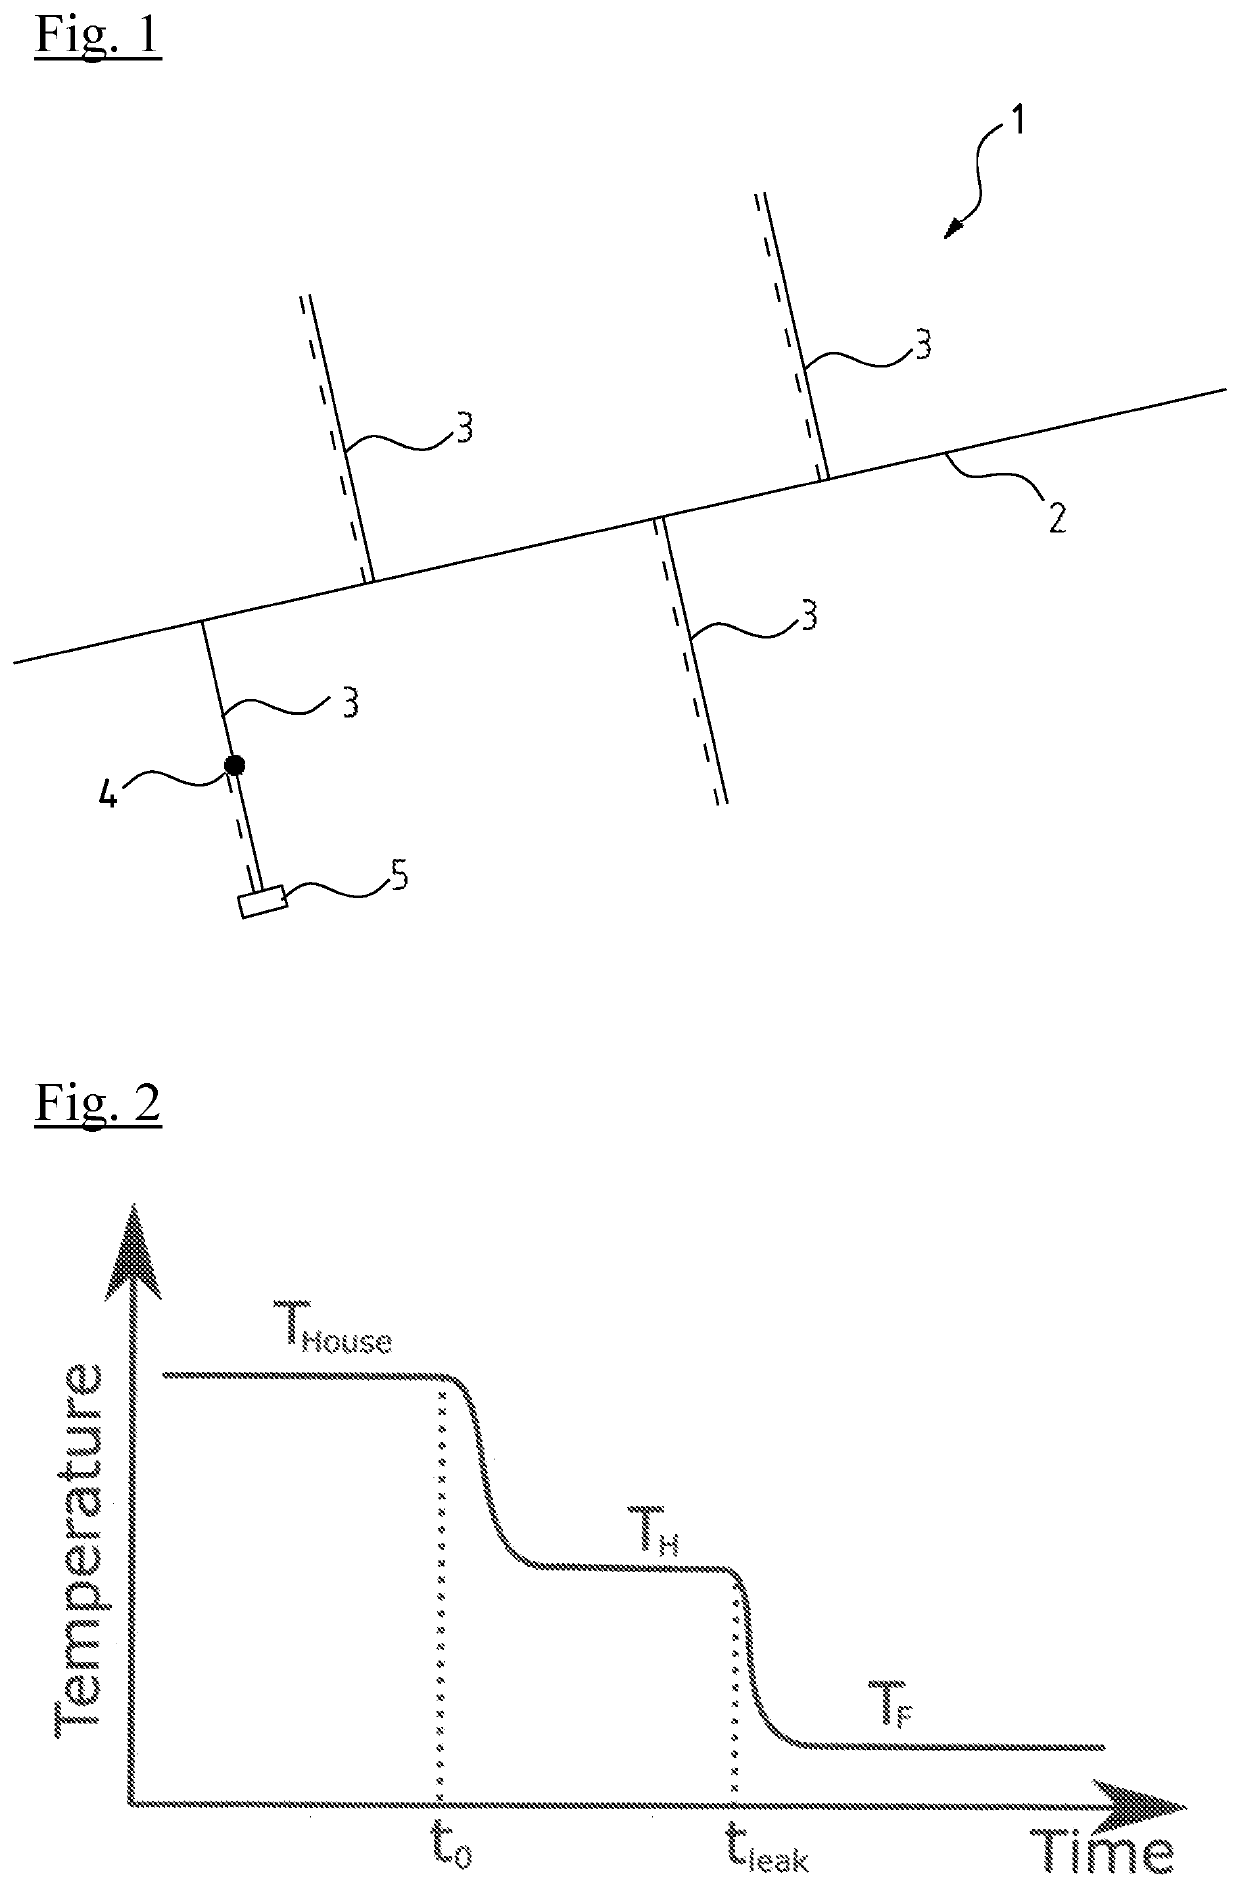 Method for locating a leak in a water supply network